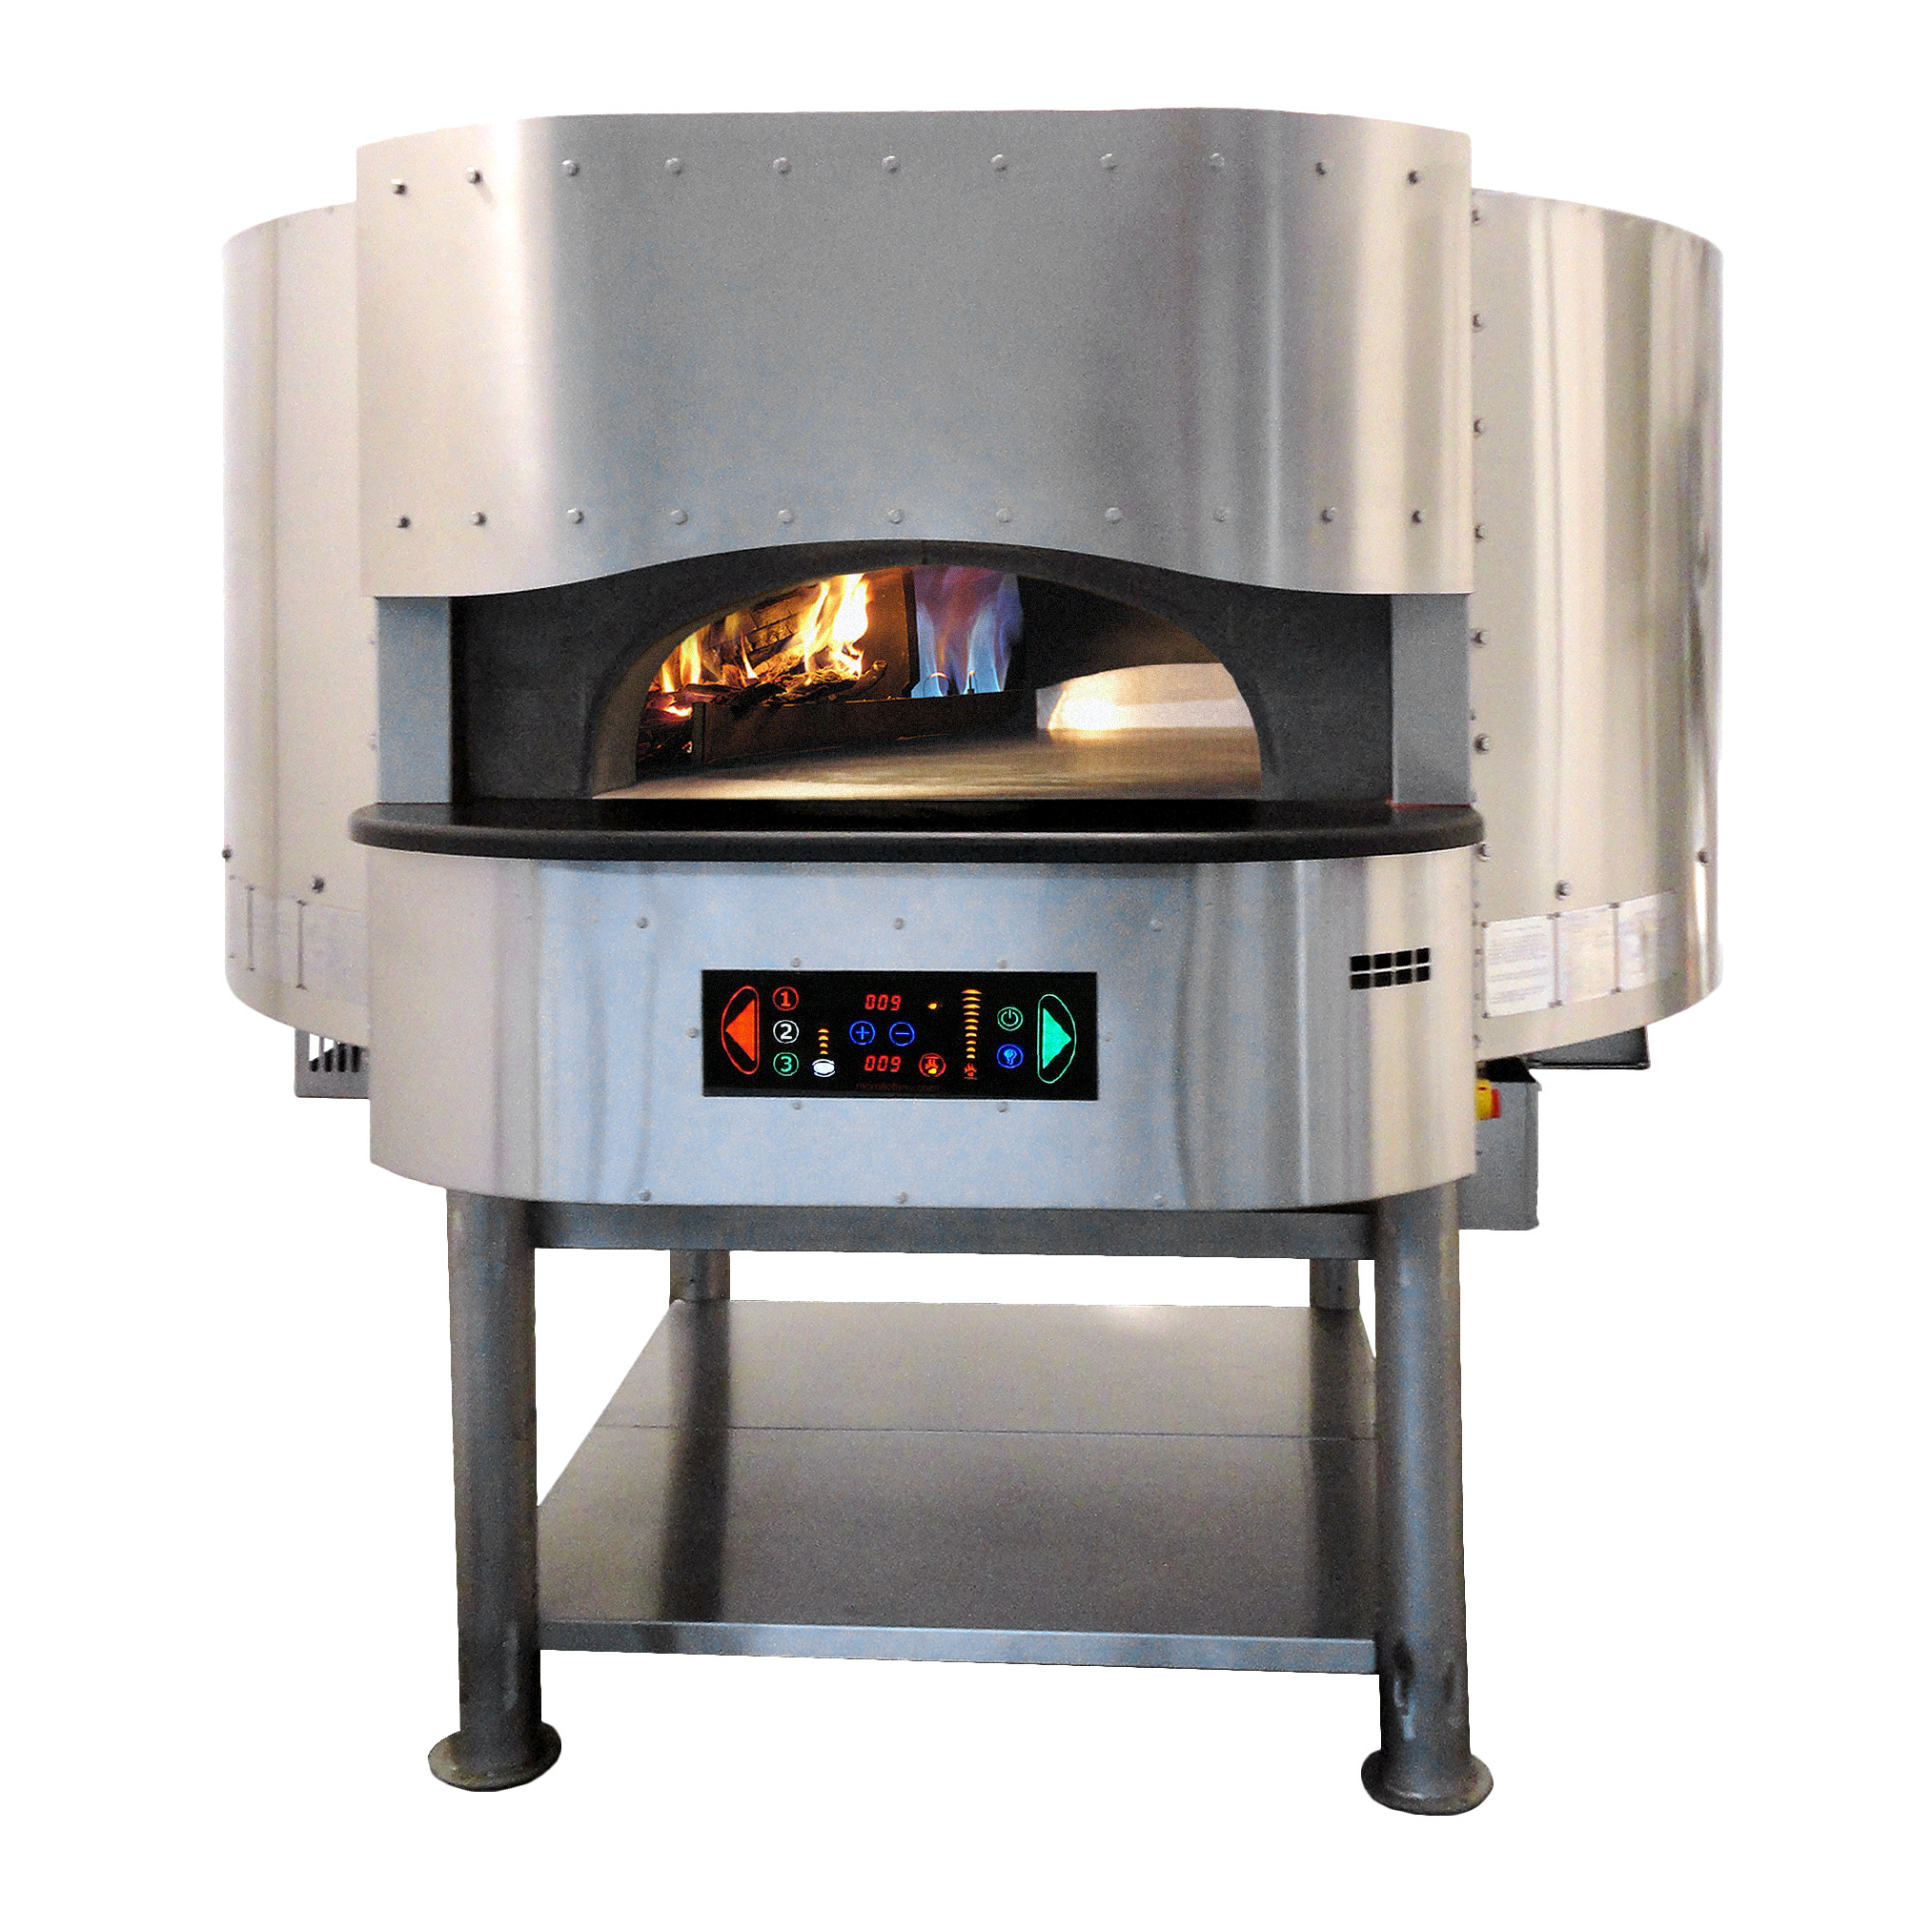 RositoBisani FGRI150-ST Wood / Coal / Gas Fired Rotary Oven w/ 59″ Cooking Chamber, Touchscreen